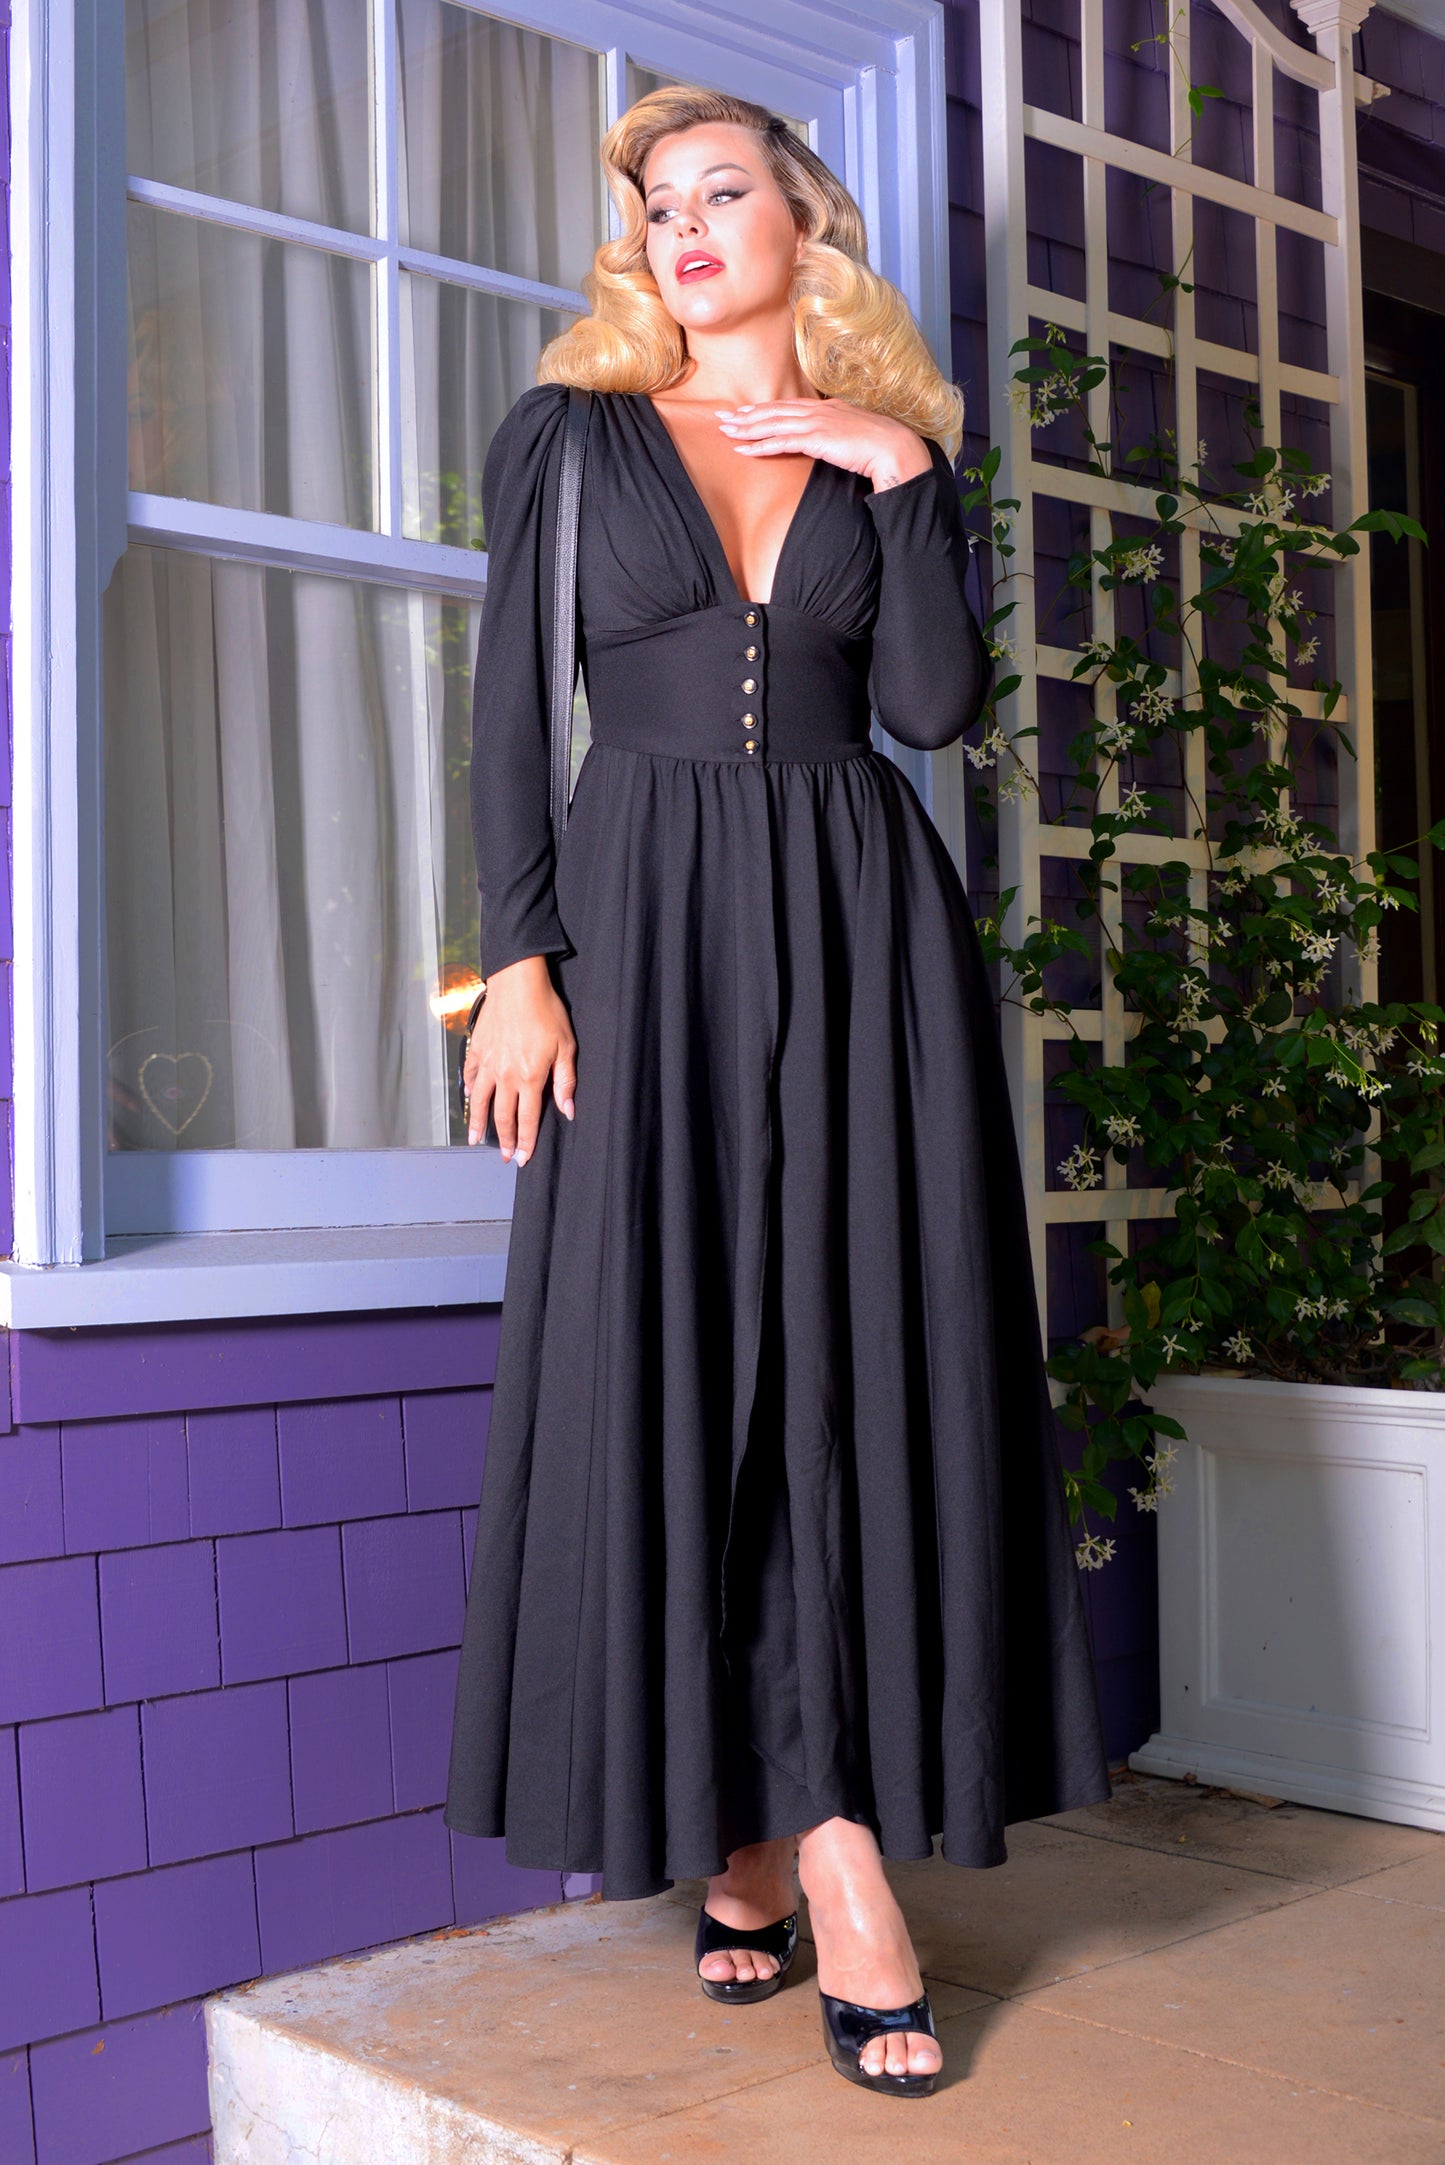 Clarice 40s Coat Dress in Solid Black Poly Crepe | Laura Byrnes Design